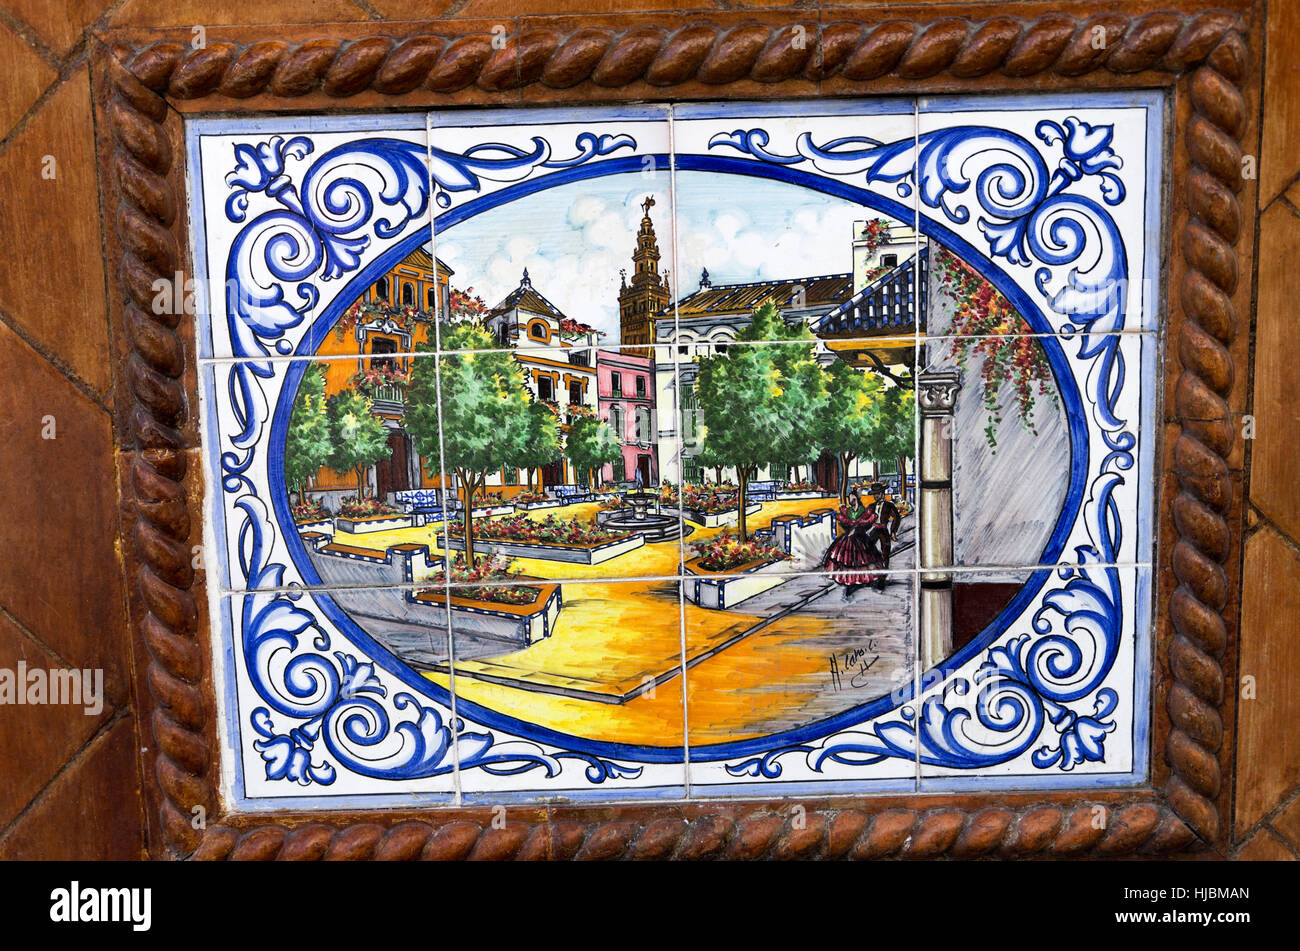 Tile plaque on side of building depicting Plaza Del Triumfo with Giralda Tower in background. Stock Photo